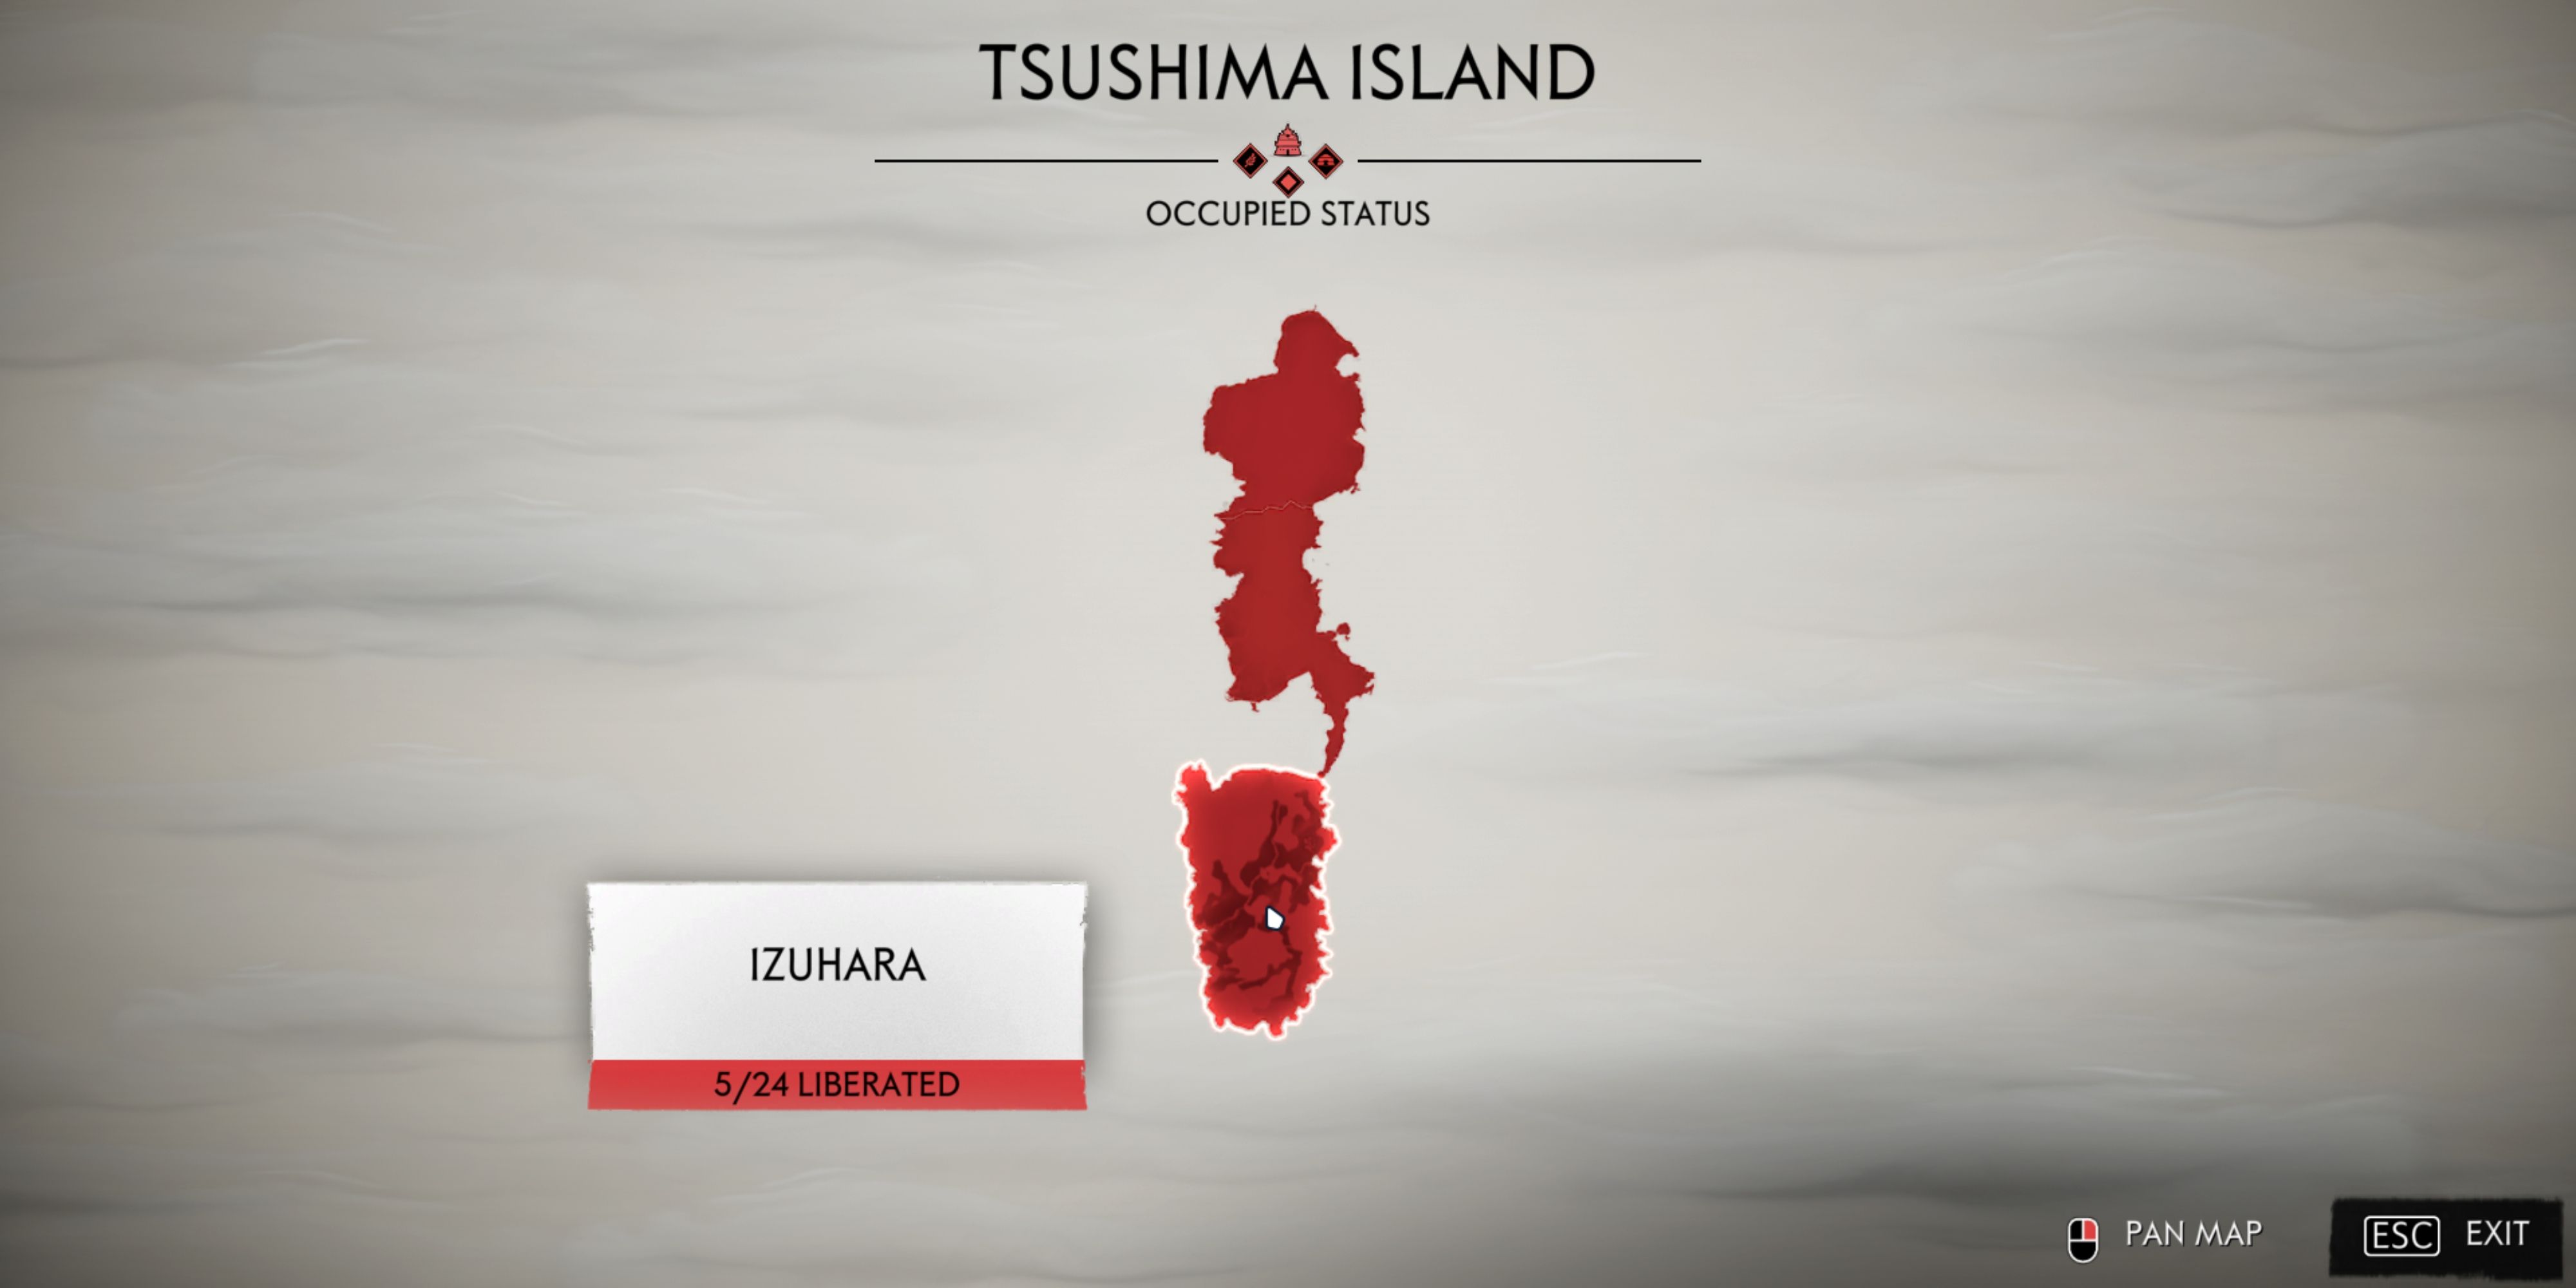 5_24 areas liberated in izuhara in ghost of tsushima